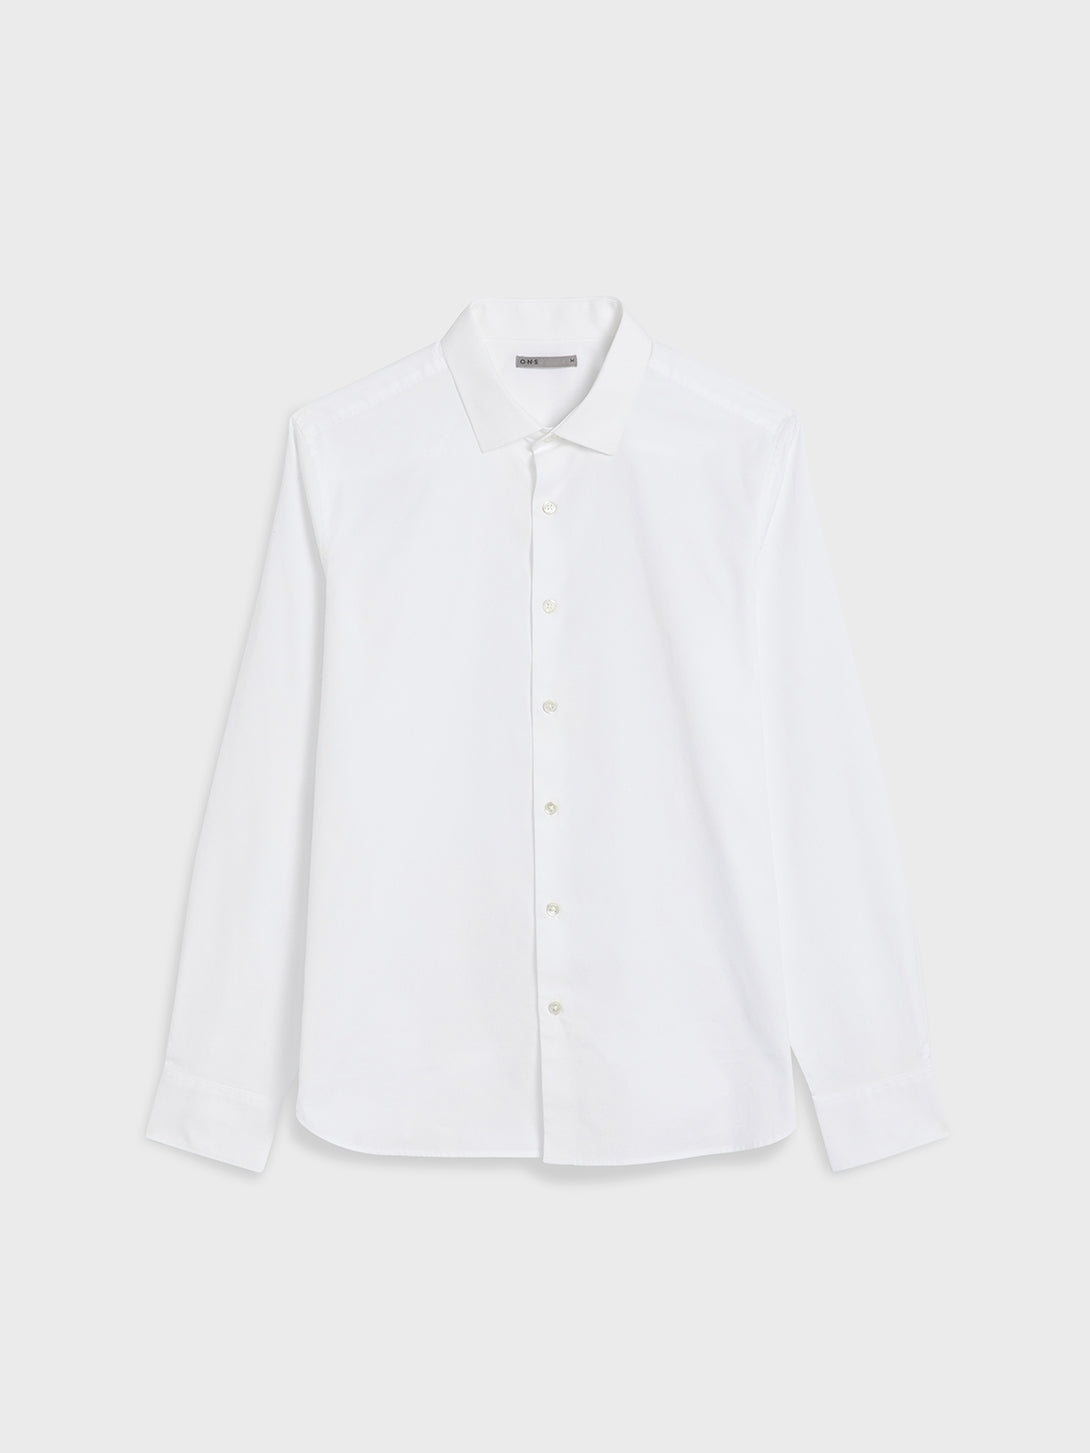 White Adrian Pinpoint Oxford Shirt Men’s cotton shirts ONS Clothing